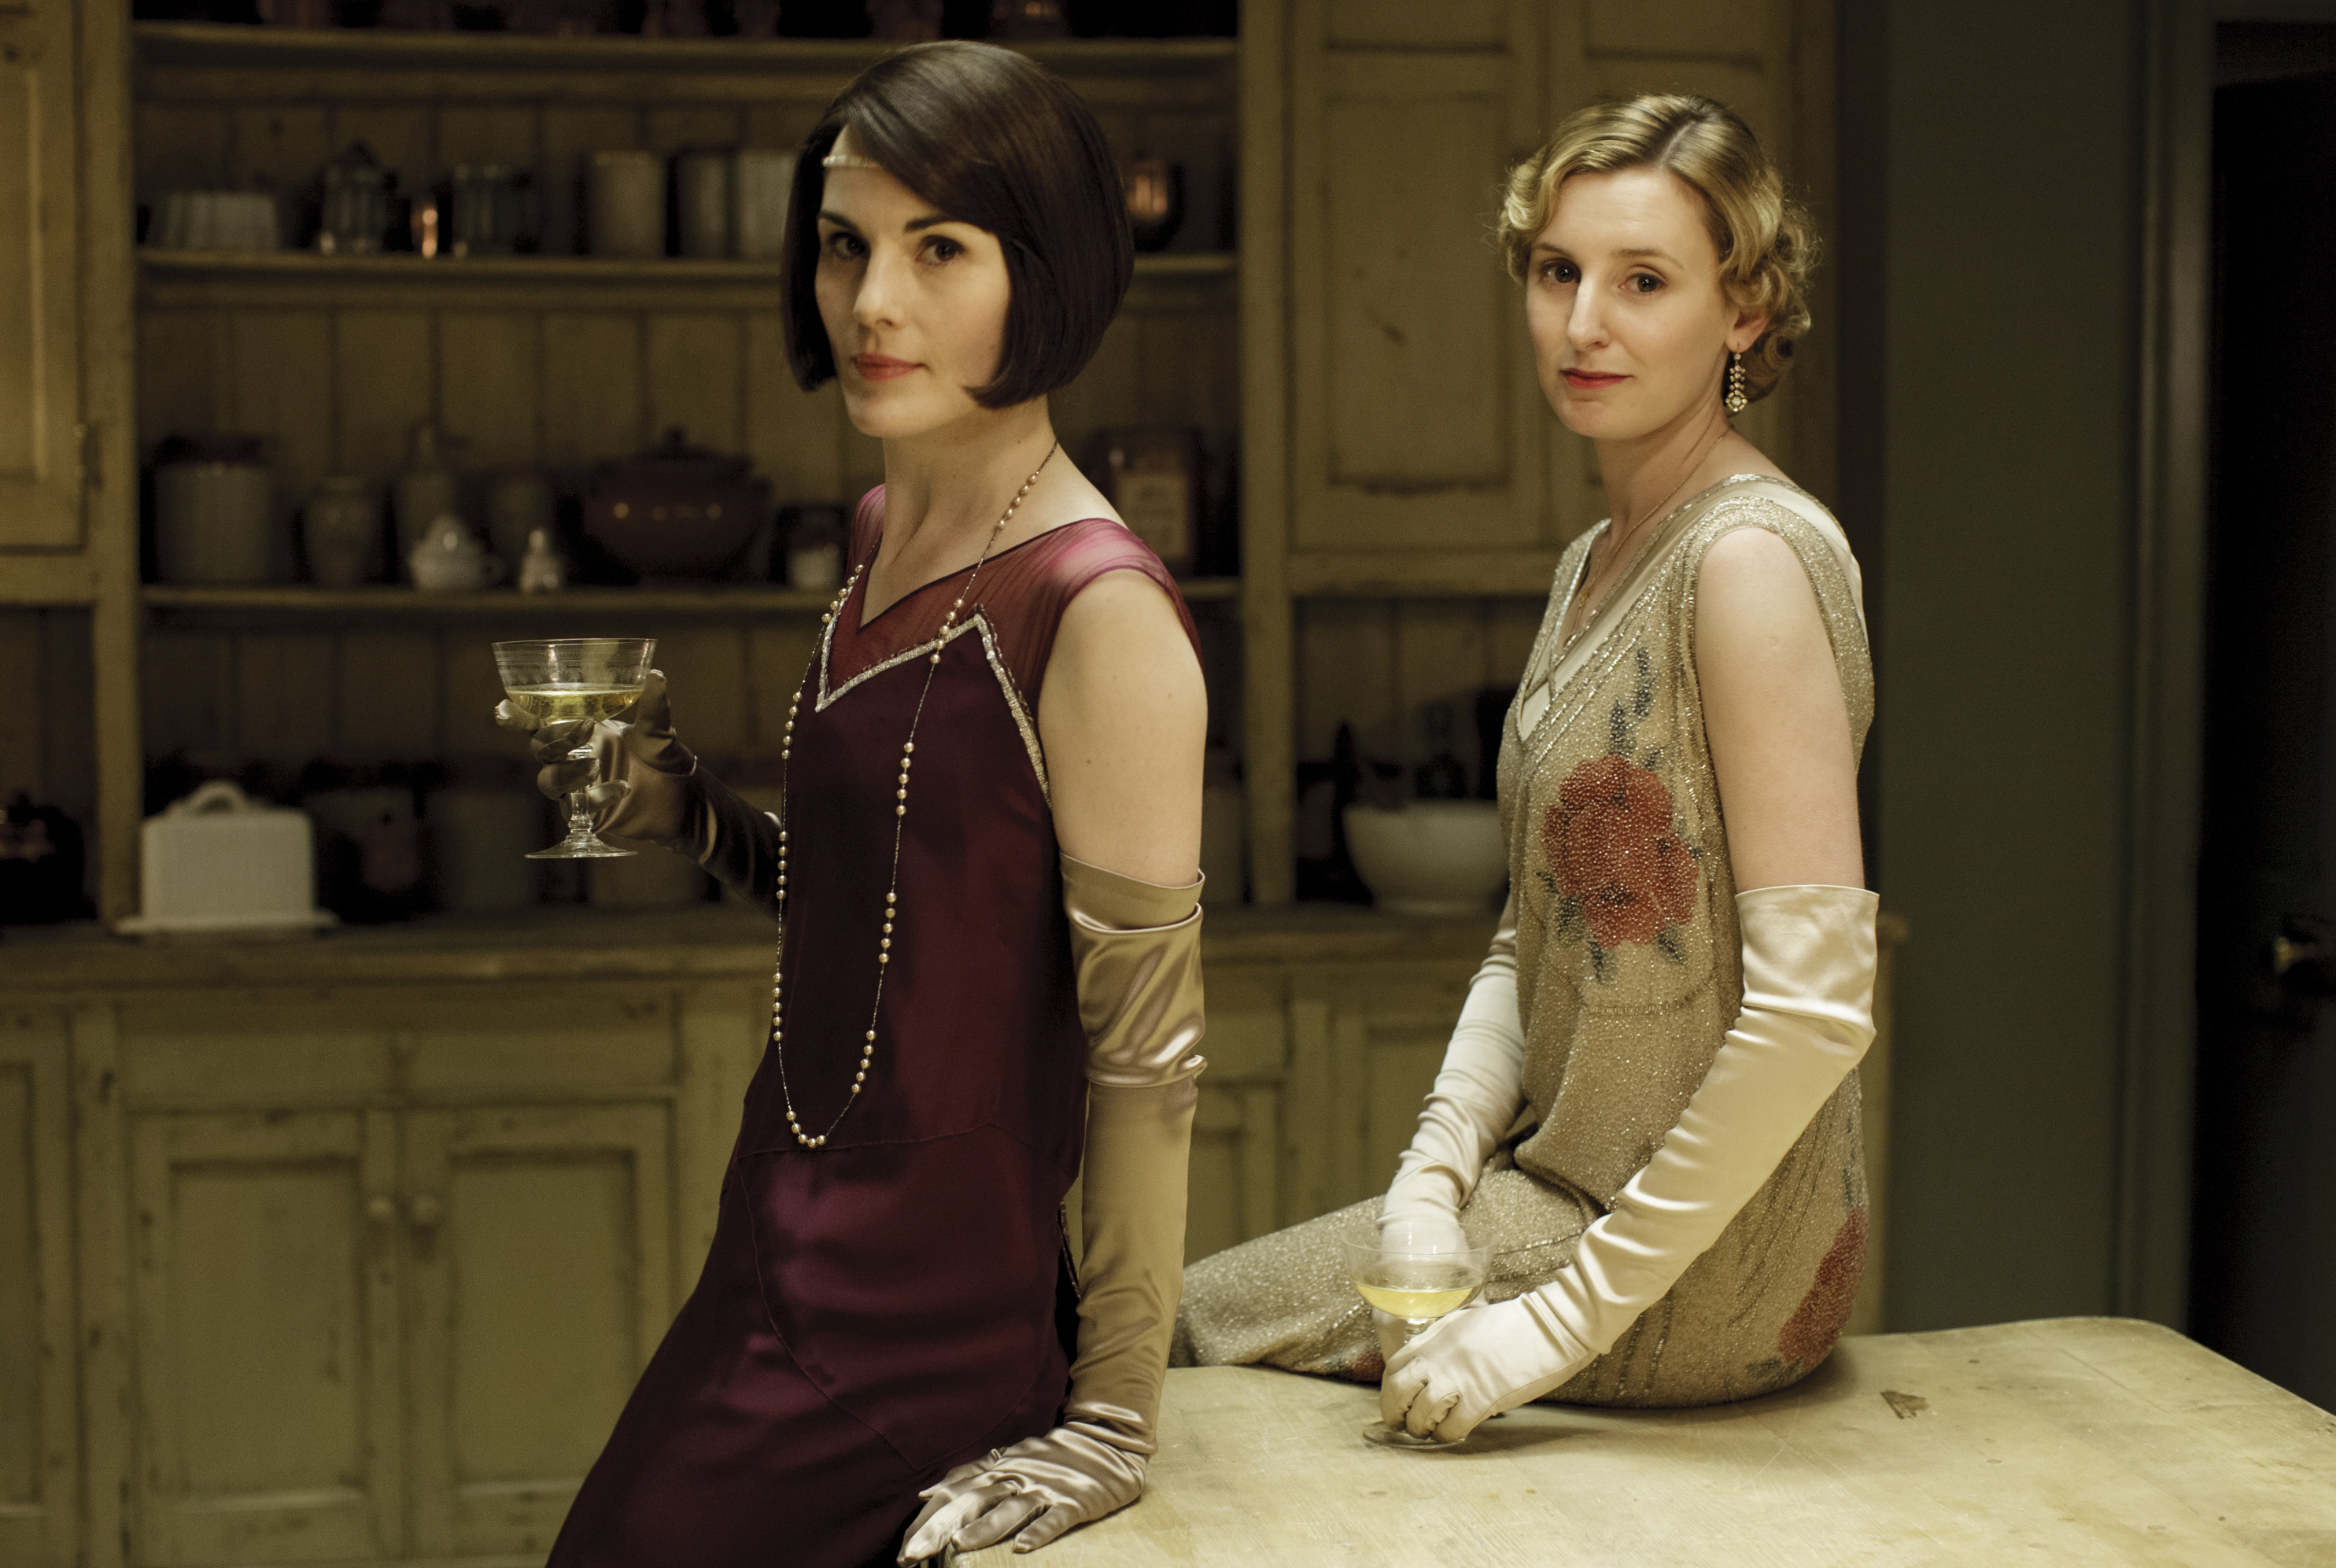 <p>We love these season 6 dresses that <a href="https://www.wonderwall.com/celebrity/profiles/overview/michelle-dockery-1488.article">Michelle Dockery</a> (as Lady Mary) and Laura Carmichael (as Lady Edith) donned for a photoshoot to promote the show's final run in 2016.</p>